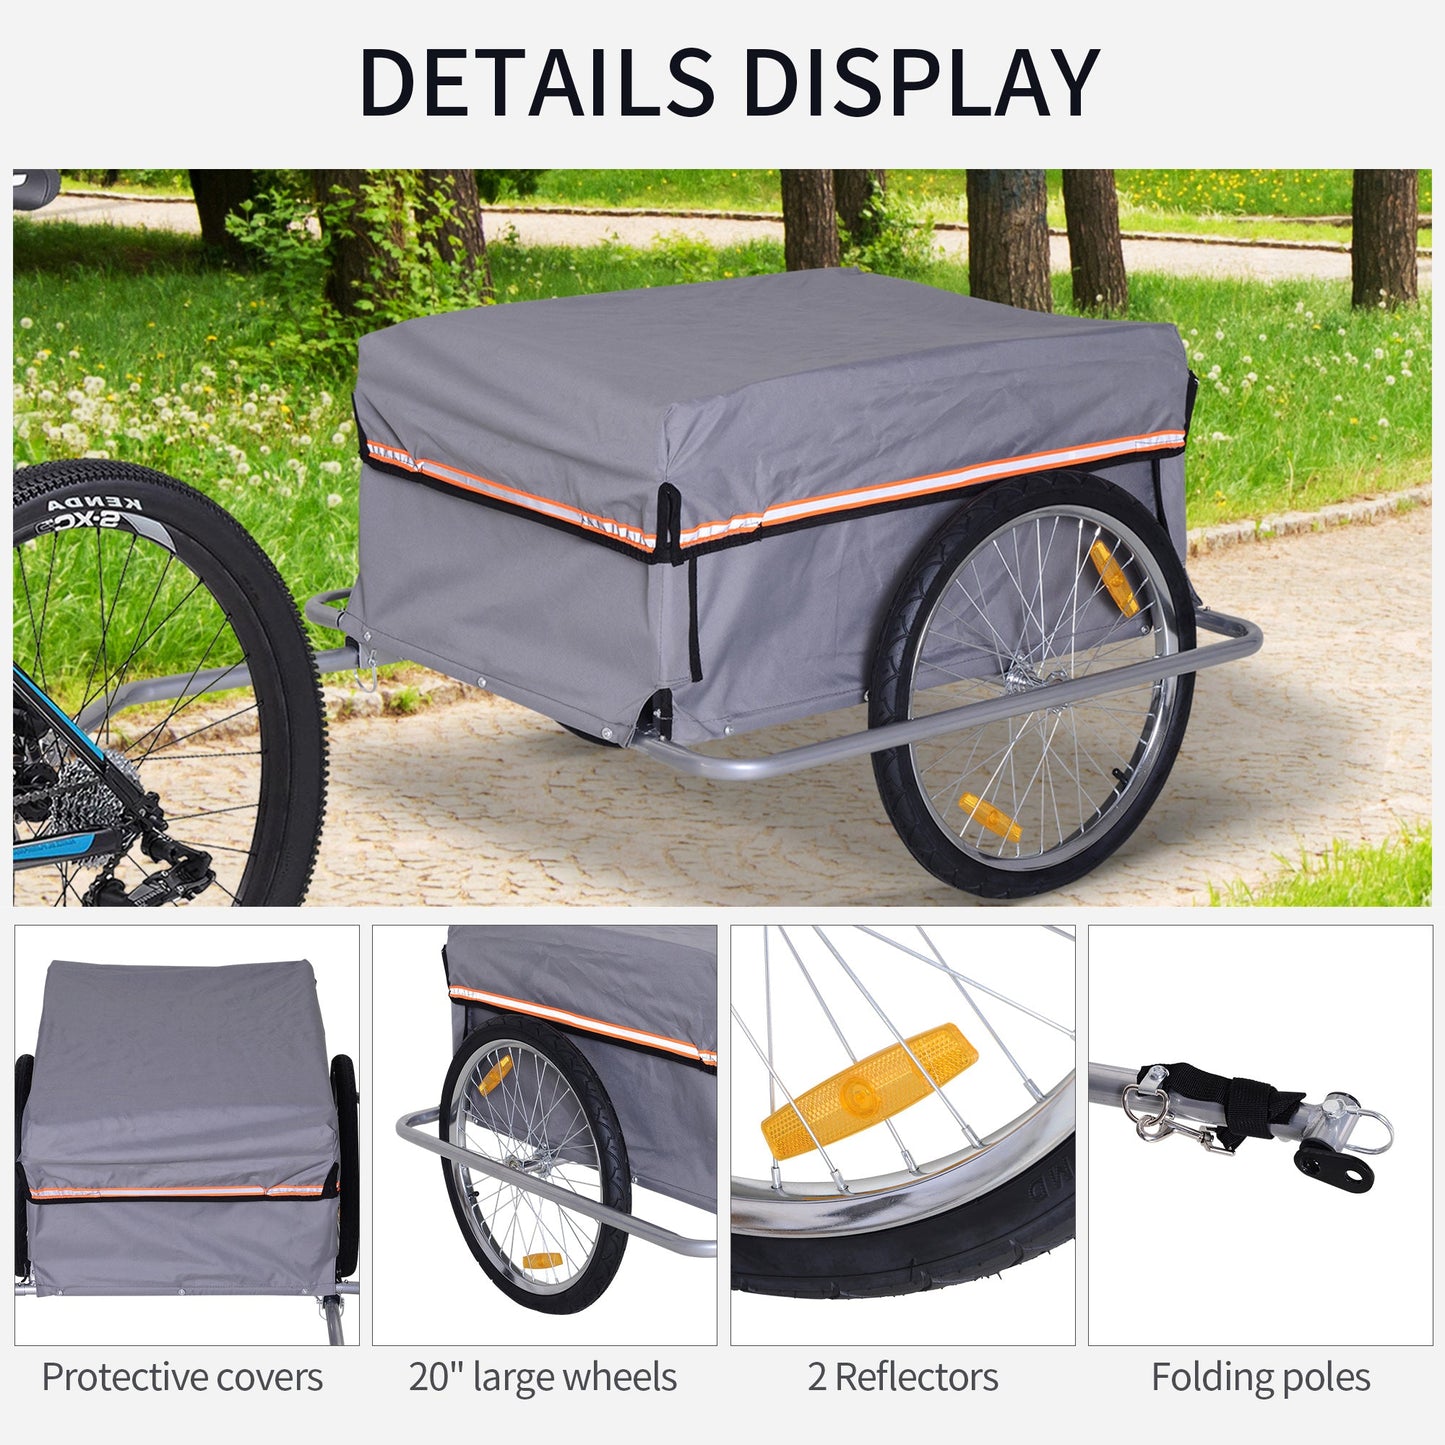 Bicycle Cargo Trailer Cart Carrier Garden Use w/ Quick Release, Cover, Grey at Gallery Canada